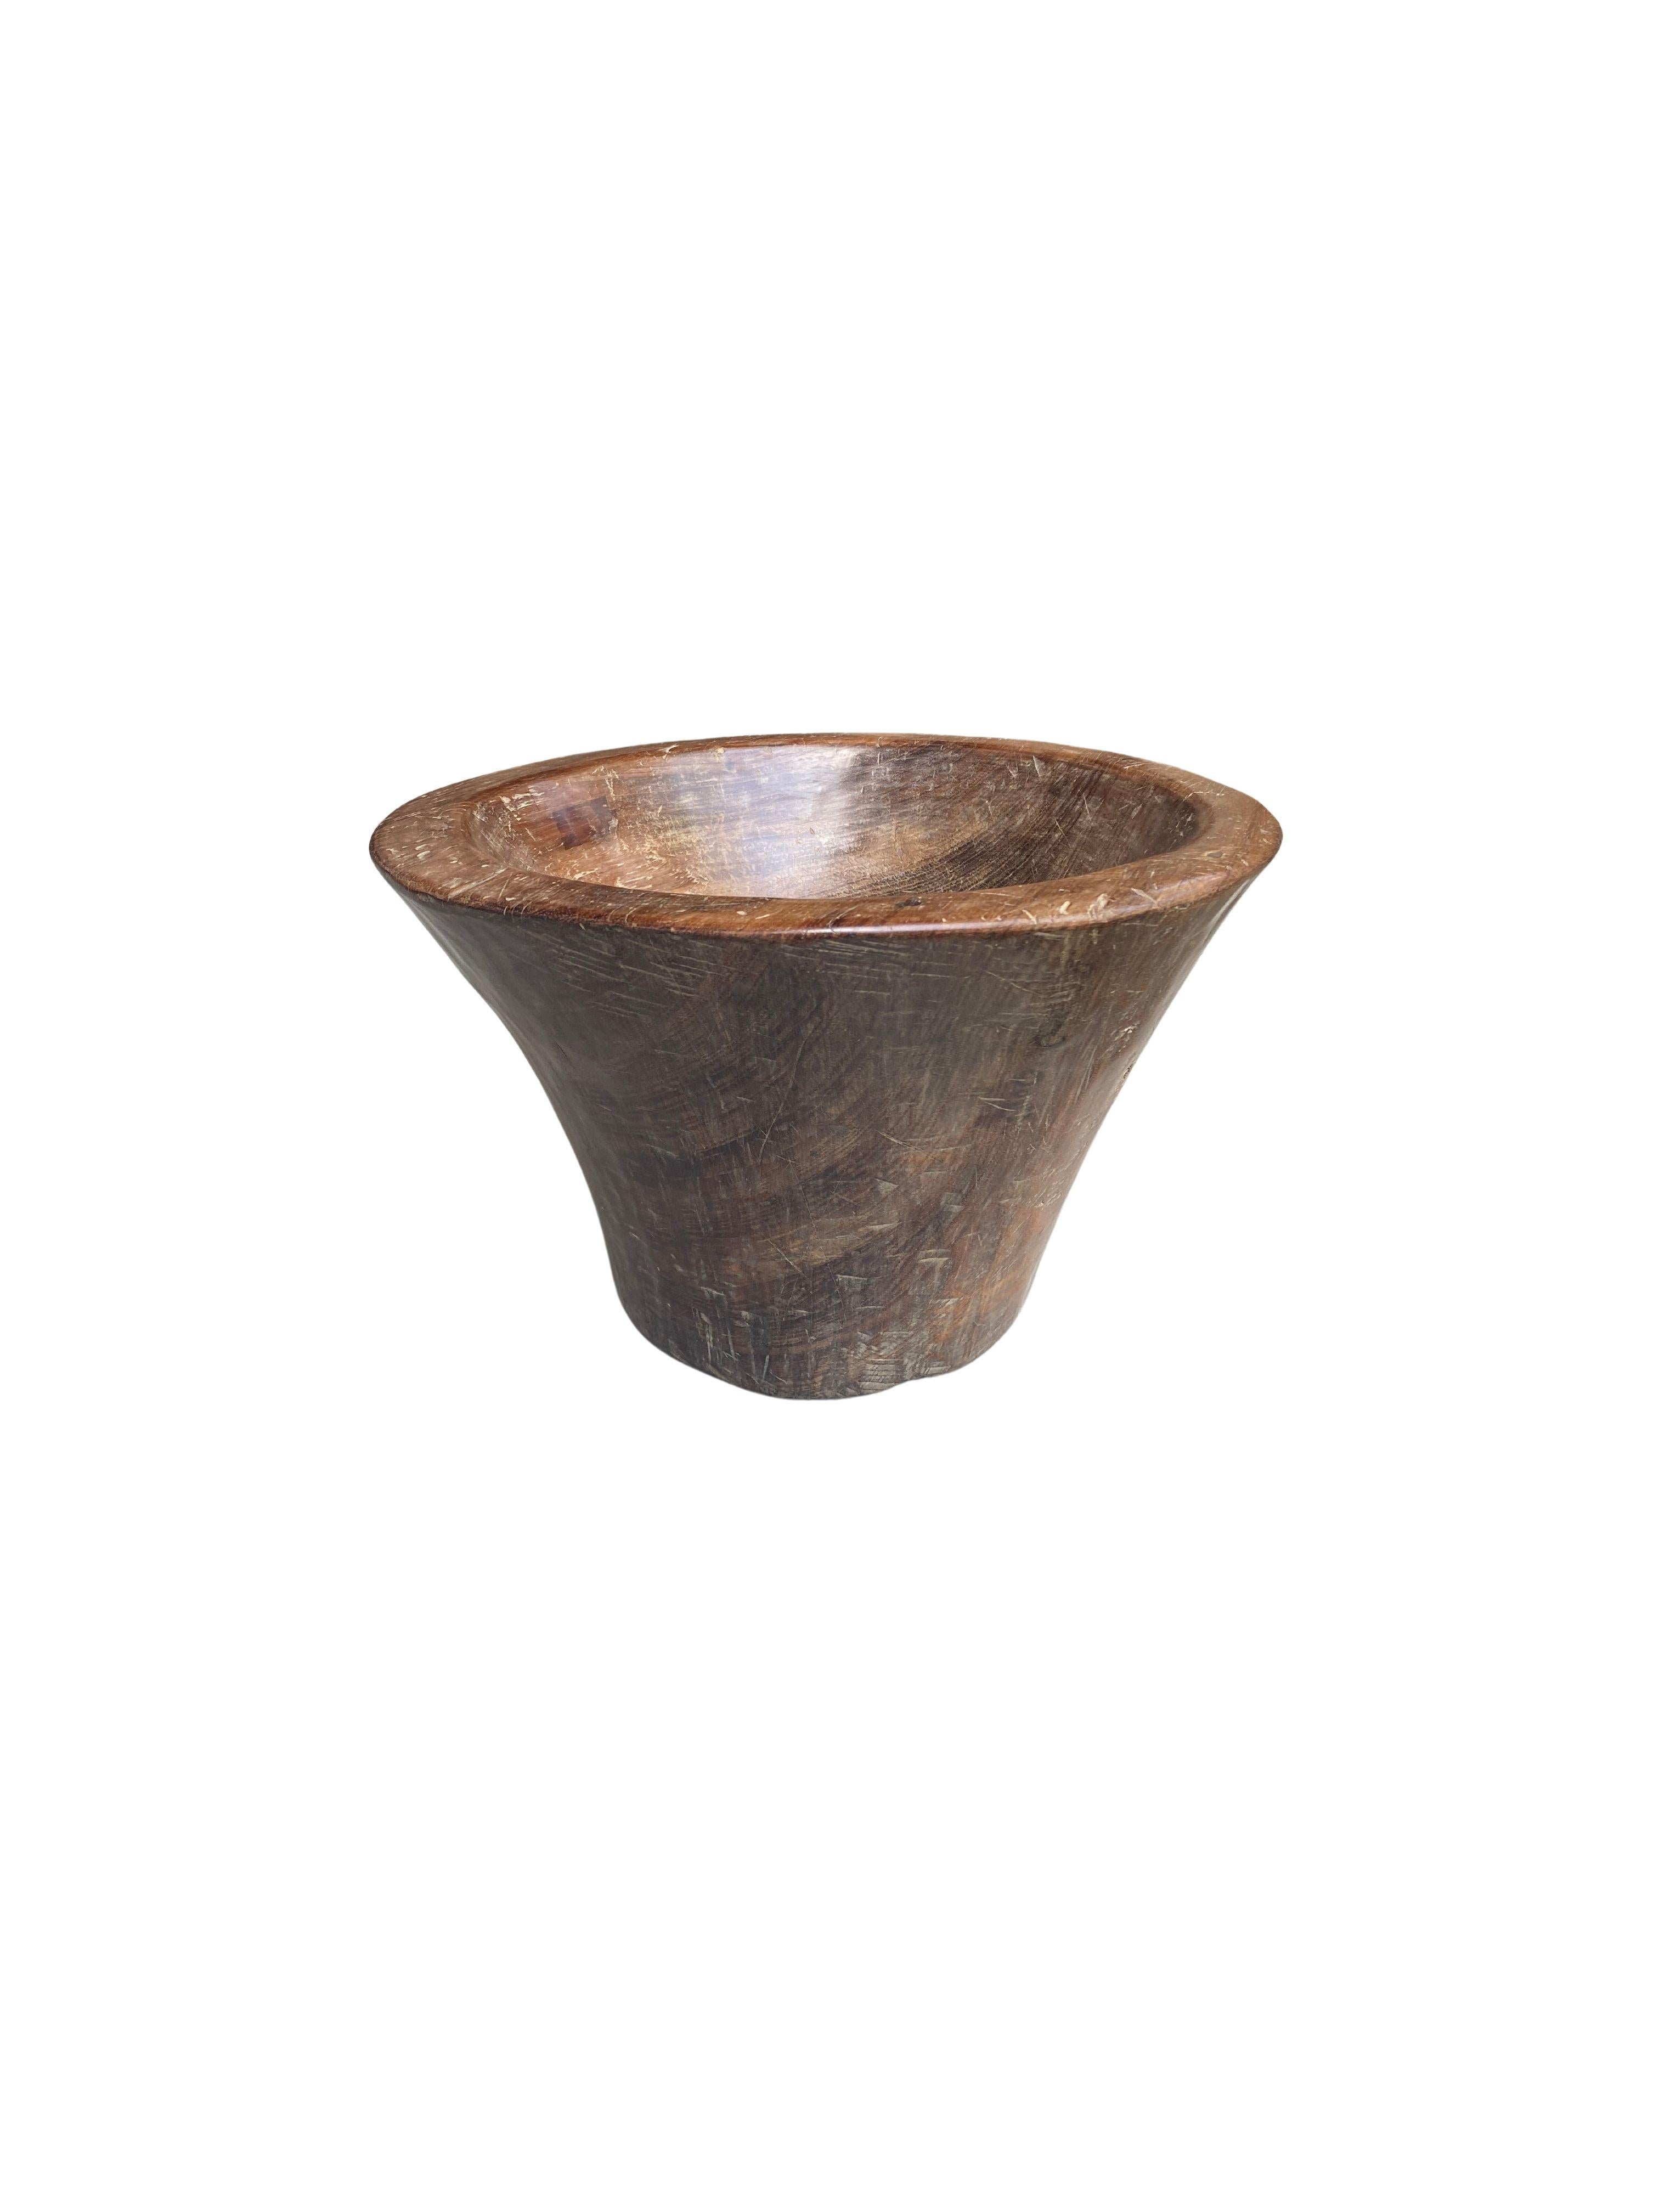 A solid teak wood bowl crafted on the island of Java. The bowl was cut from a much larger slab of wood and maintains a minimalist organic design with a range of textures. Perfect to display items as a centrepiece or decorative addition to any